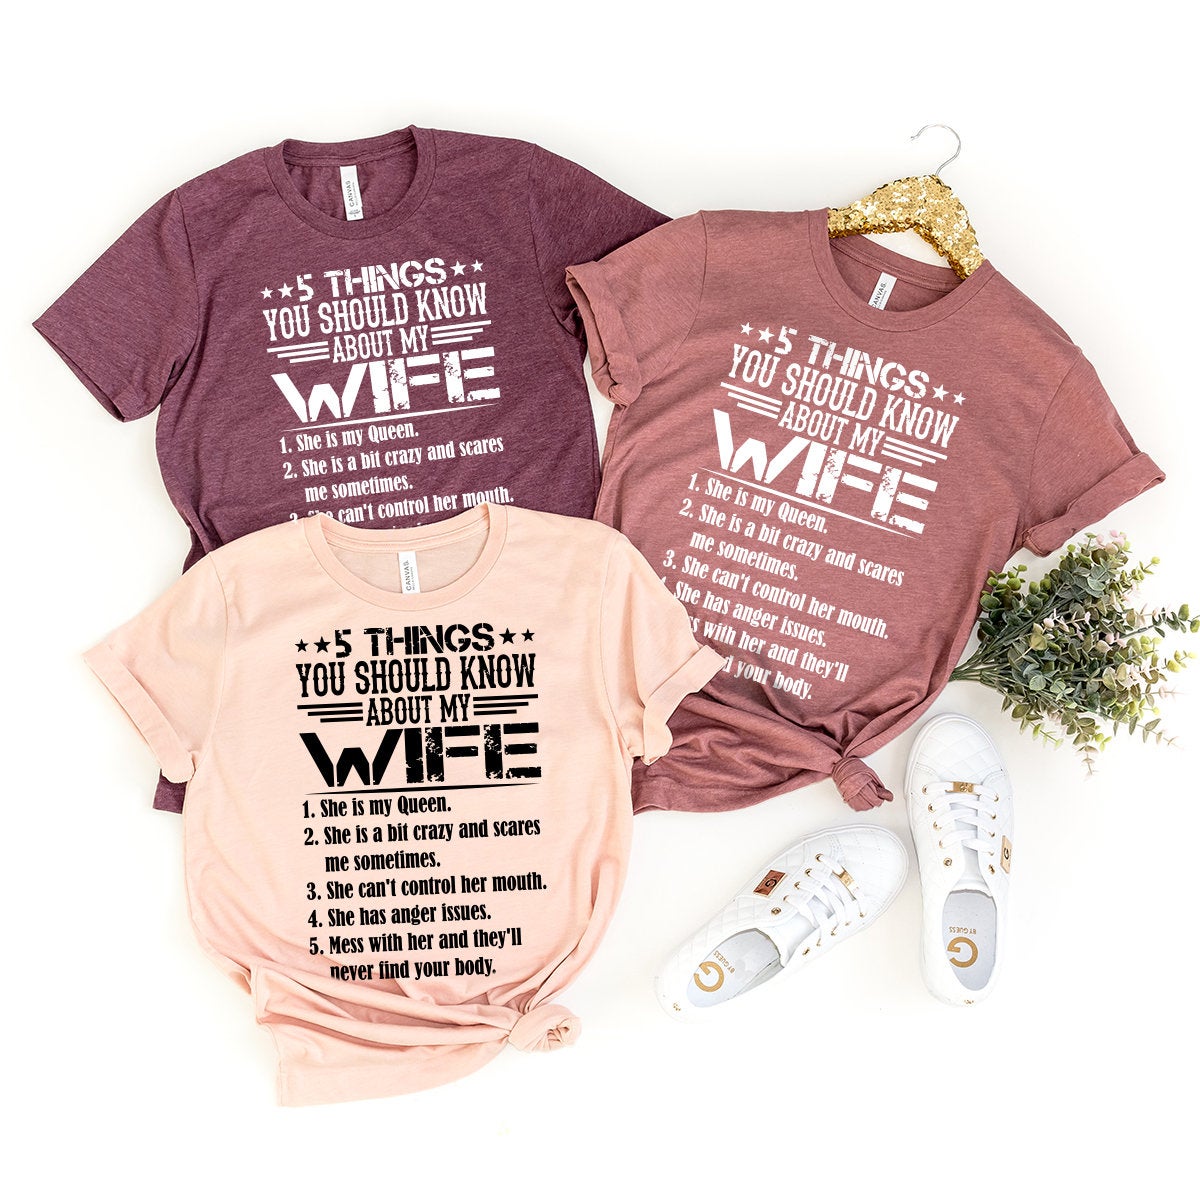 Funny Husband Shirt, Funny Gift For Husband, 5 Things You Should Know About My Wife T-Shirt, Best Husband Shirt, Sarcastic Husband Tee - Fastdeliverytees.com